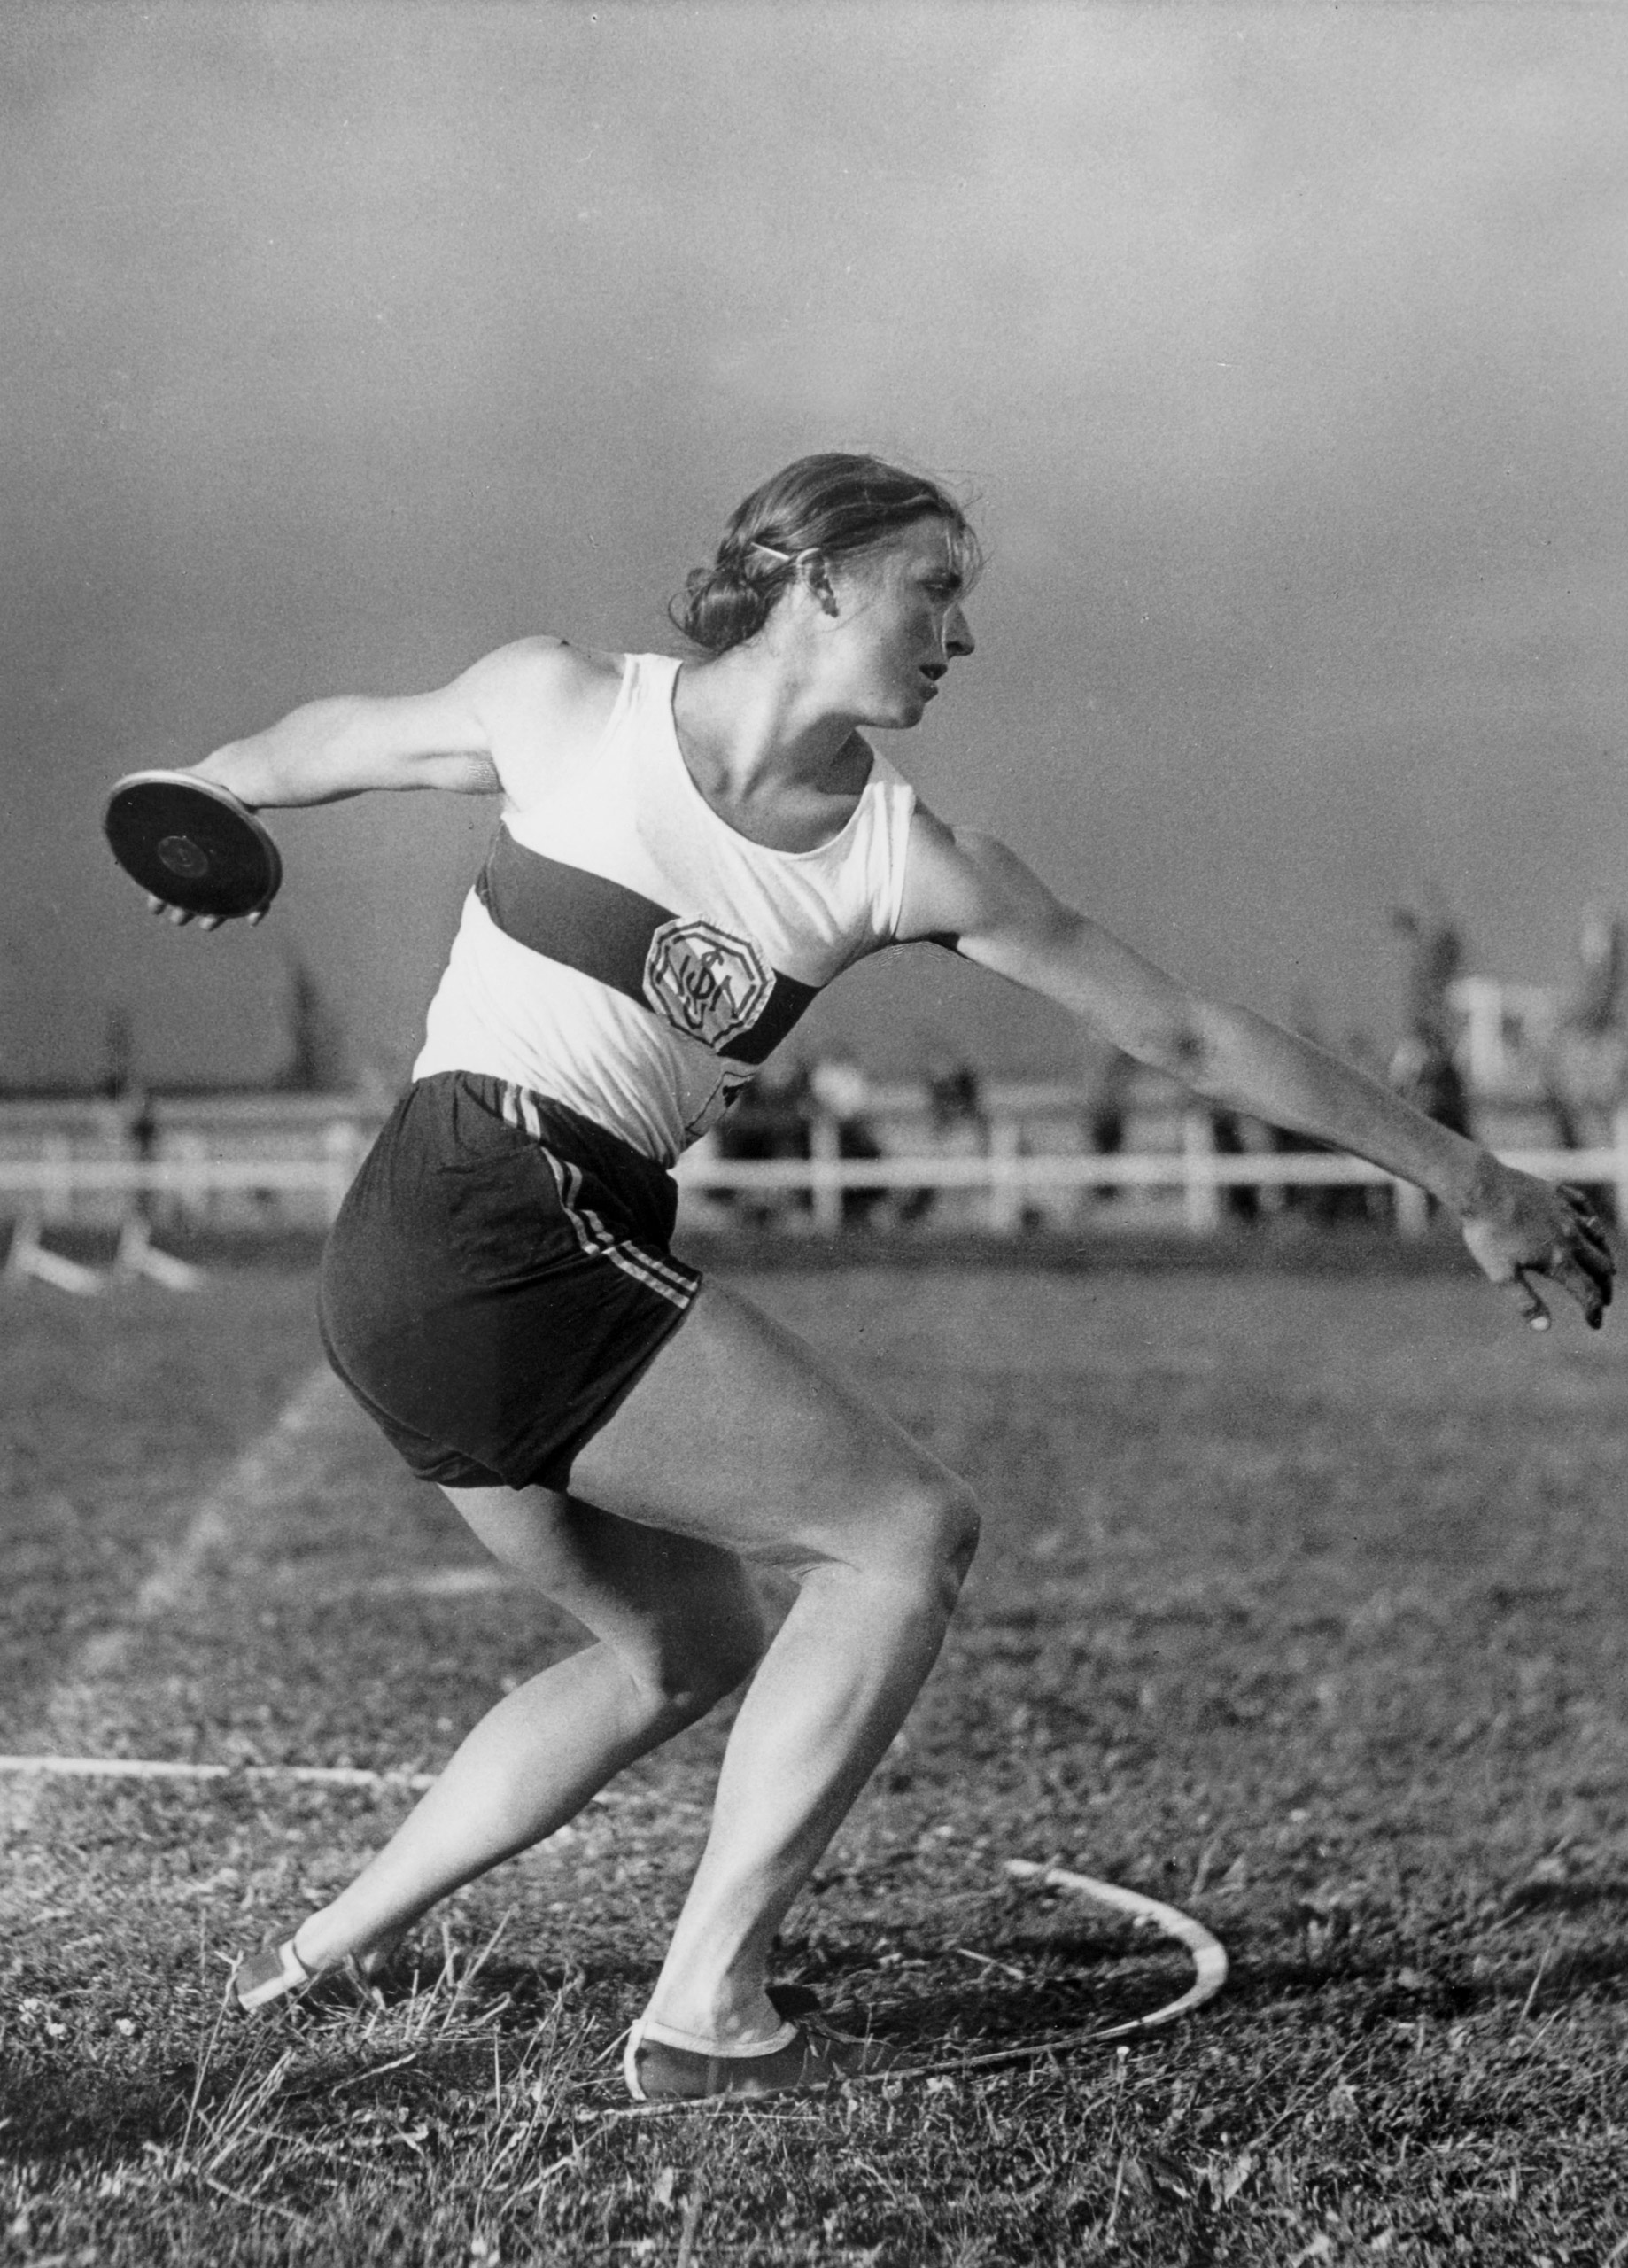 Gisela Mauermayer, Germany, winner of the gold medal in the Discus event at the 1936 Olympic Games.